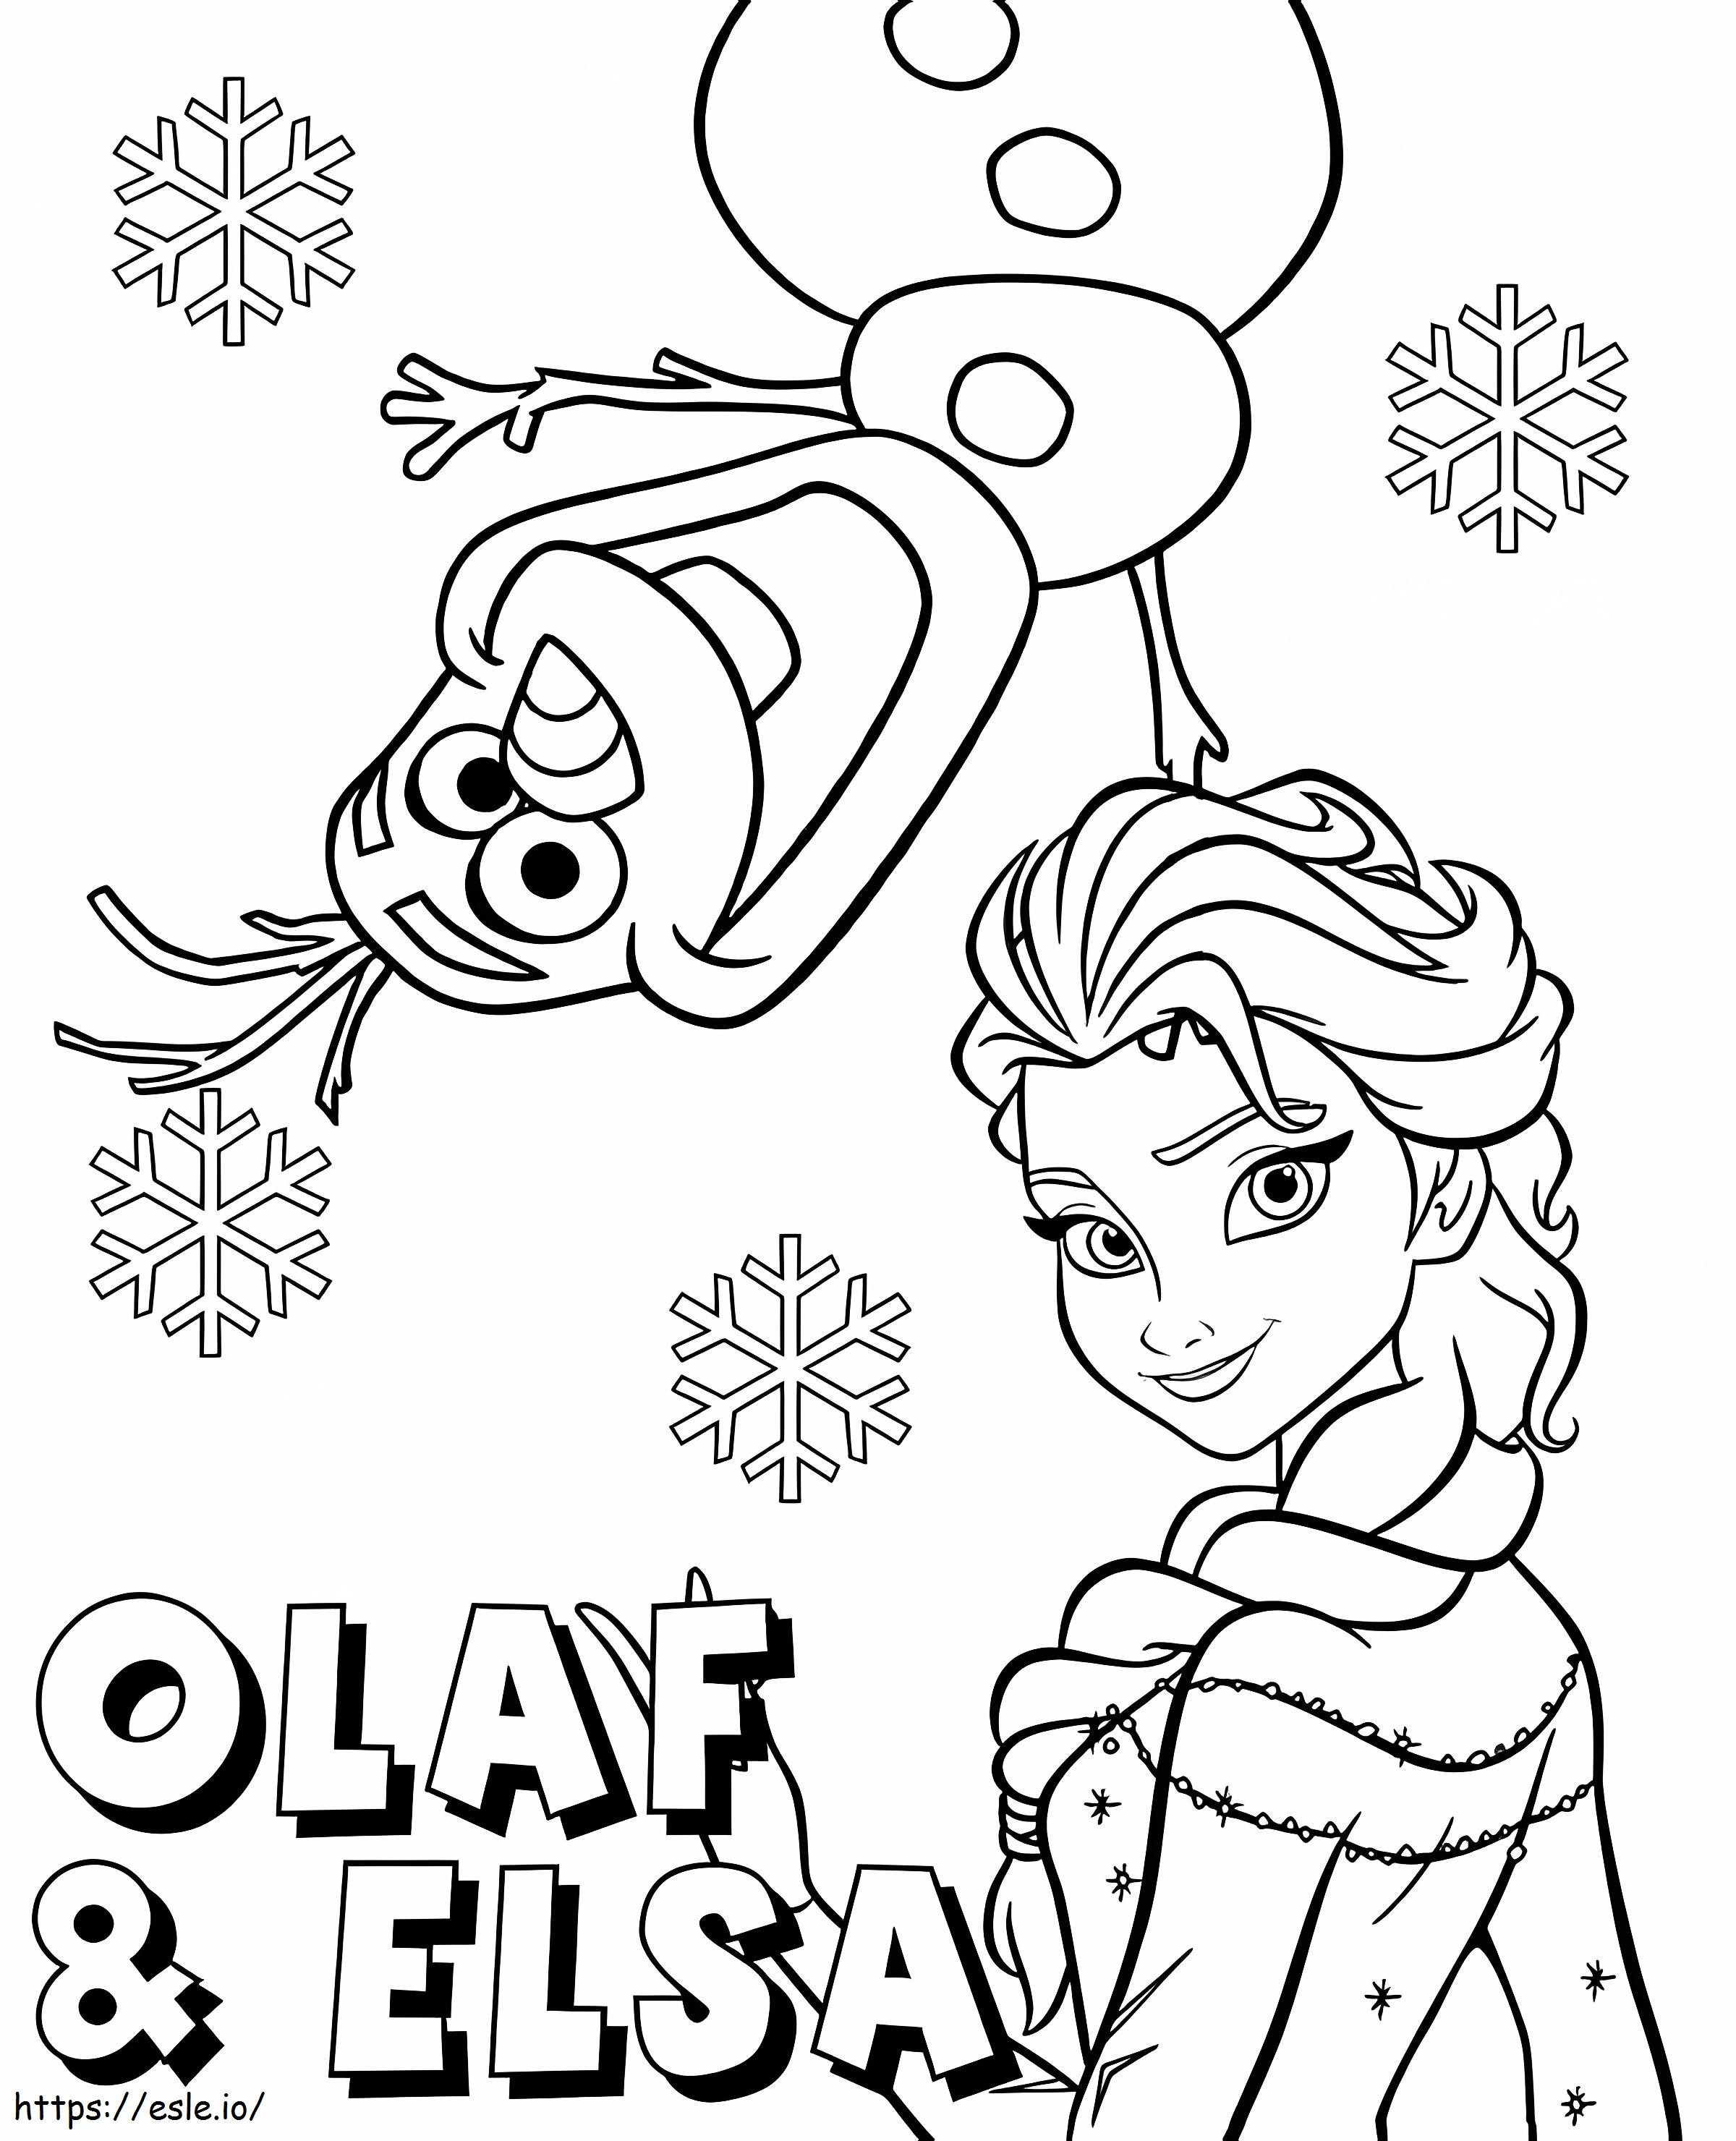 Face Elsa And Olaf coloring page